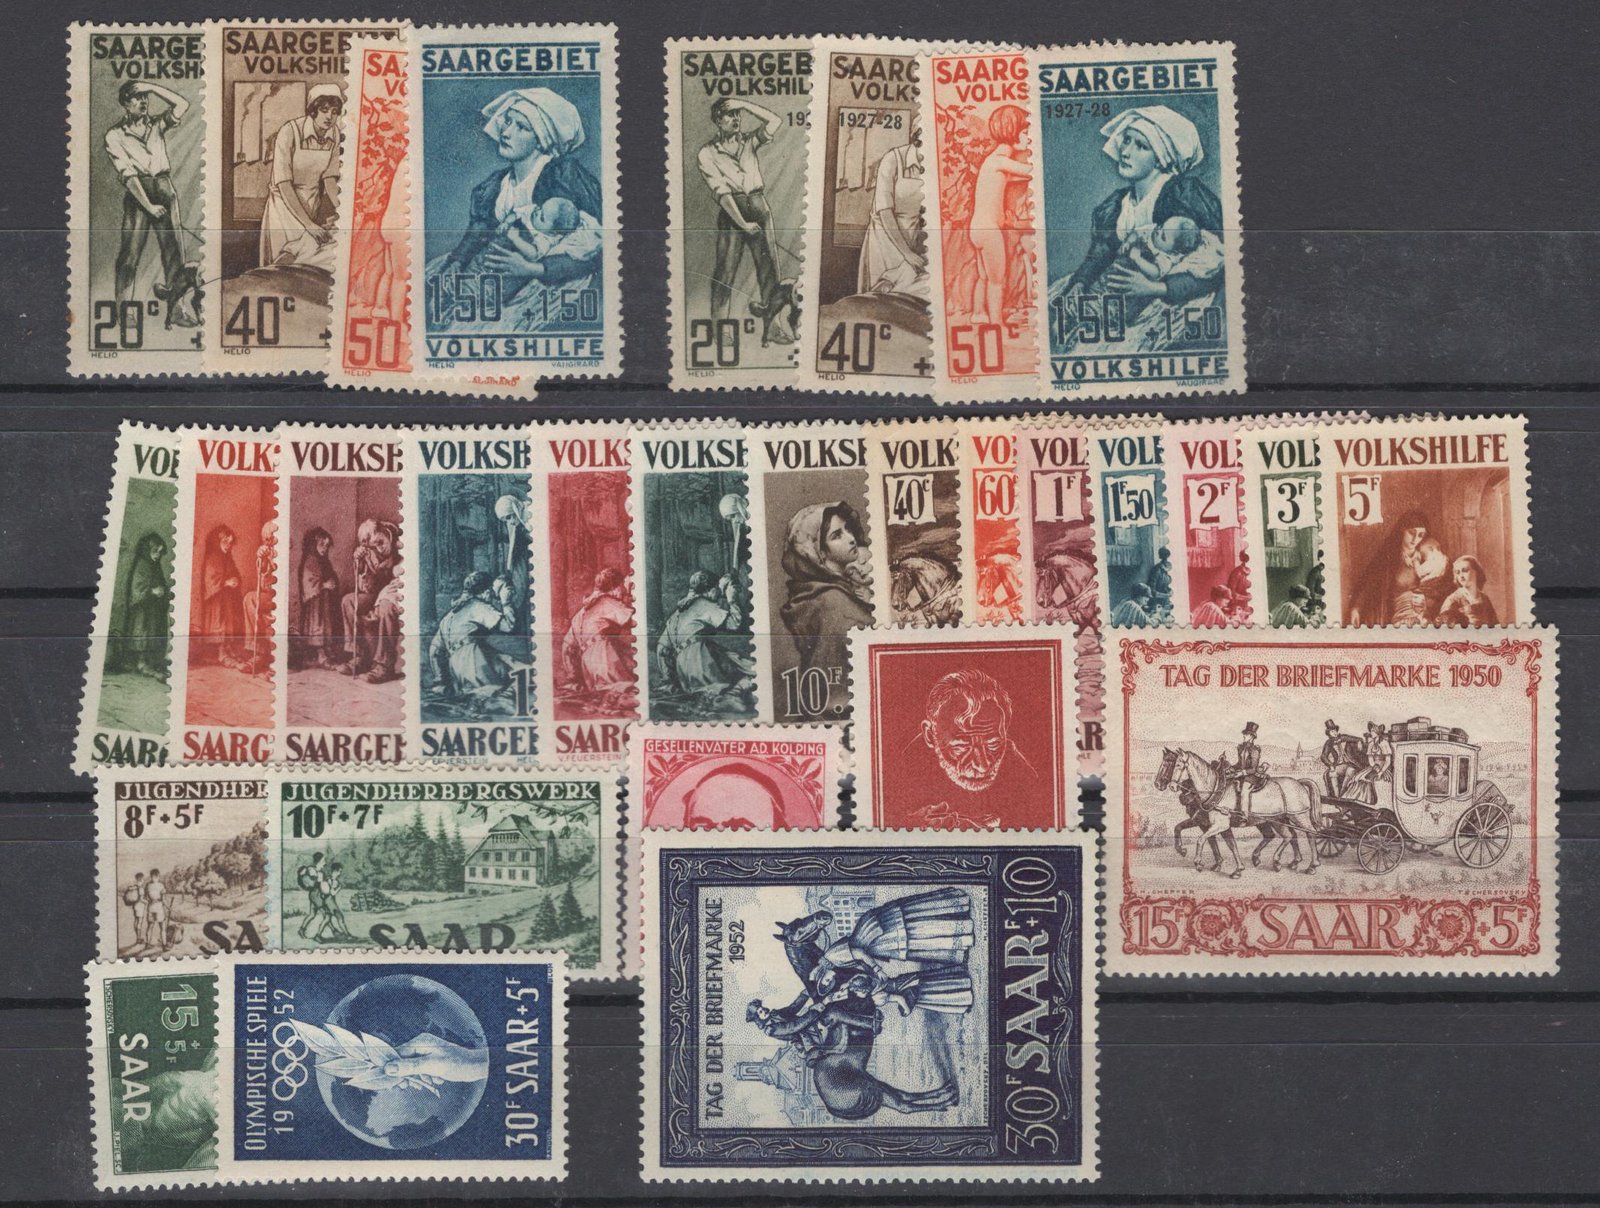 Lot #7 – Saar –  collection of * F/VF compete sets of semi-postals – catalog value $440